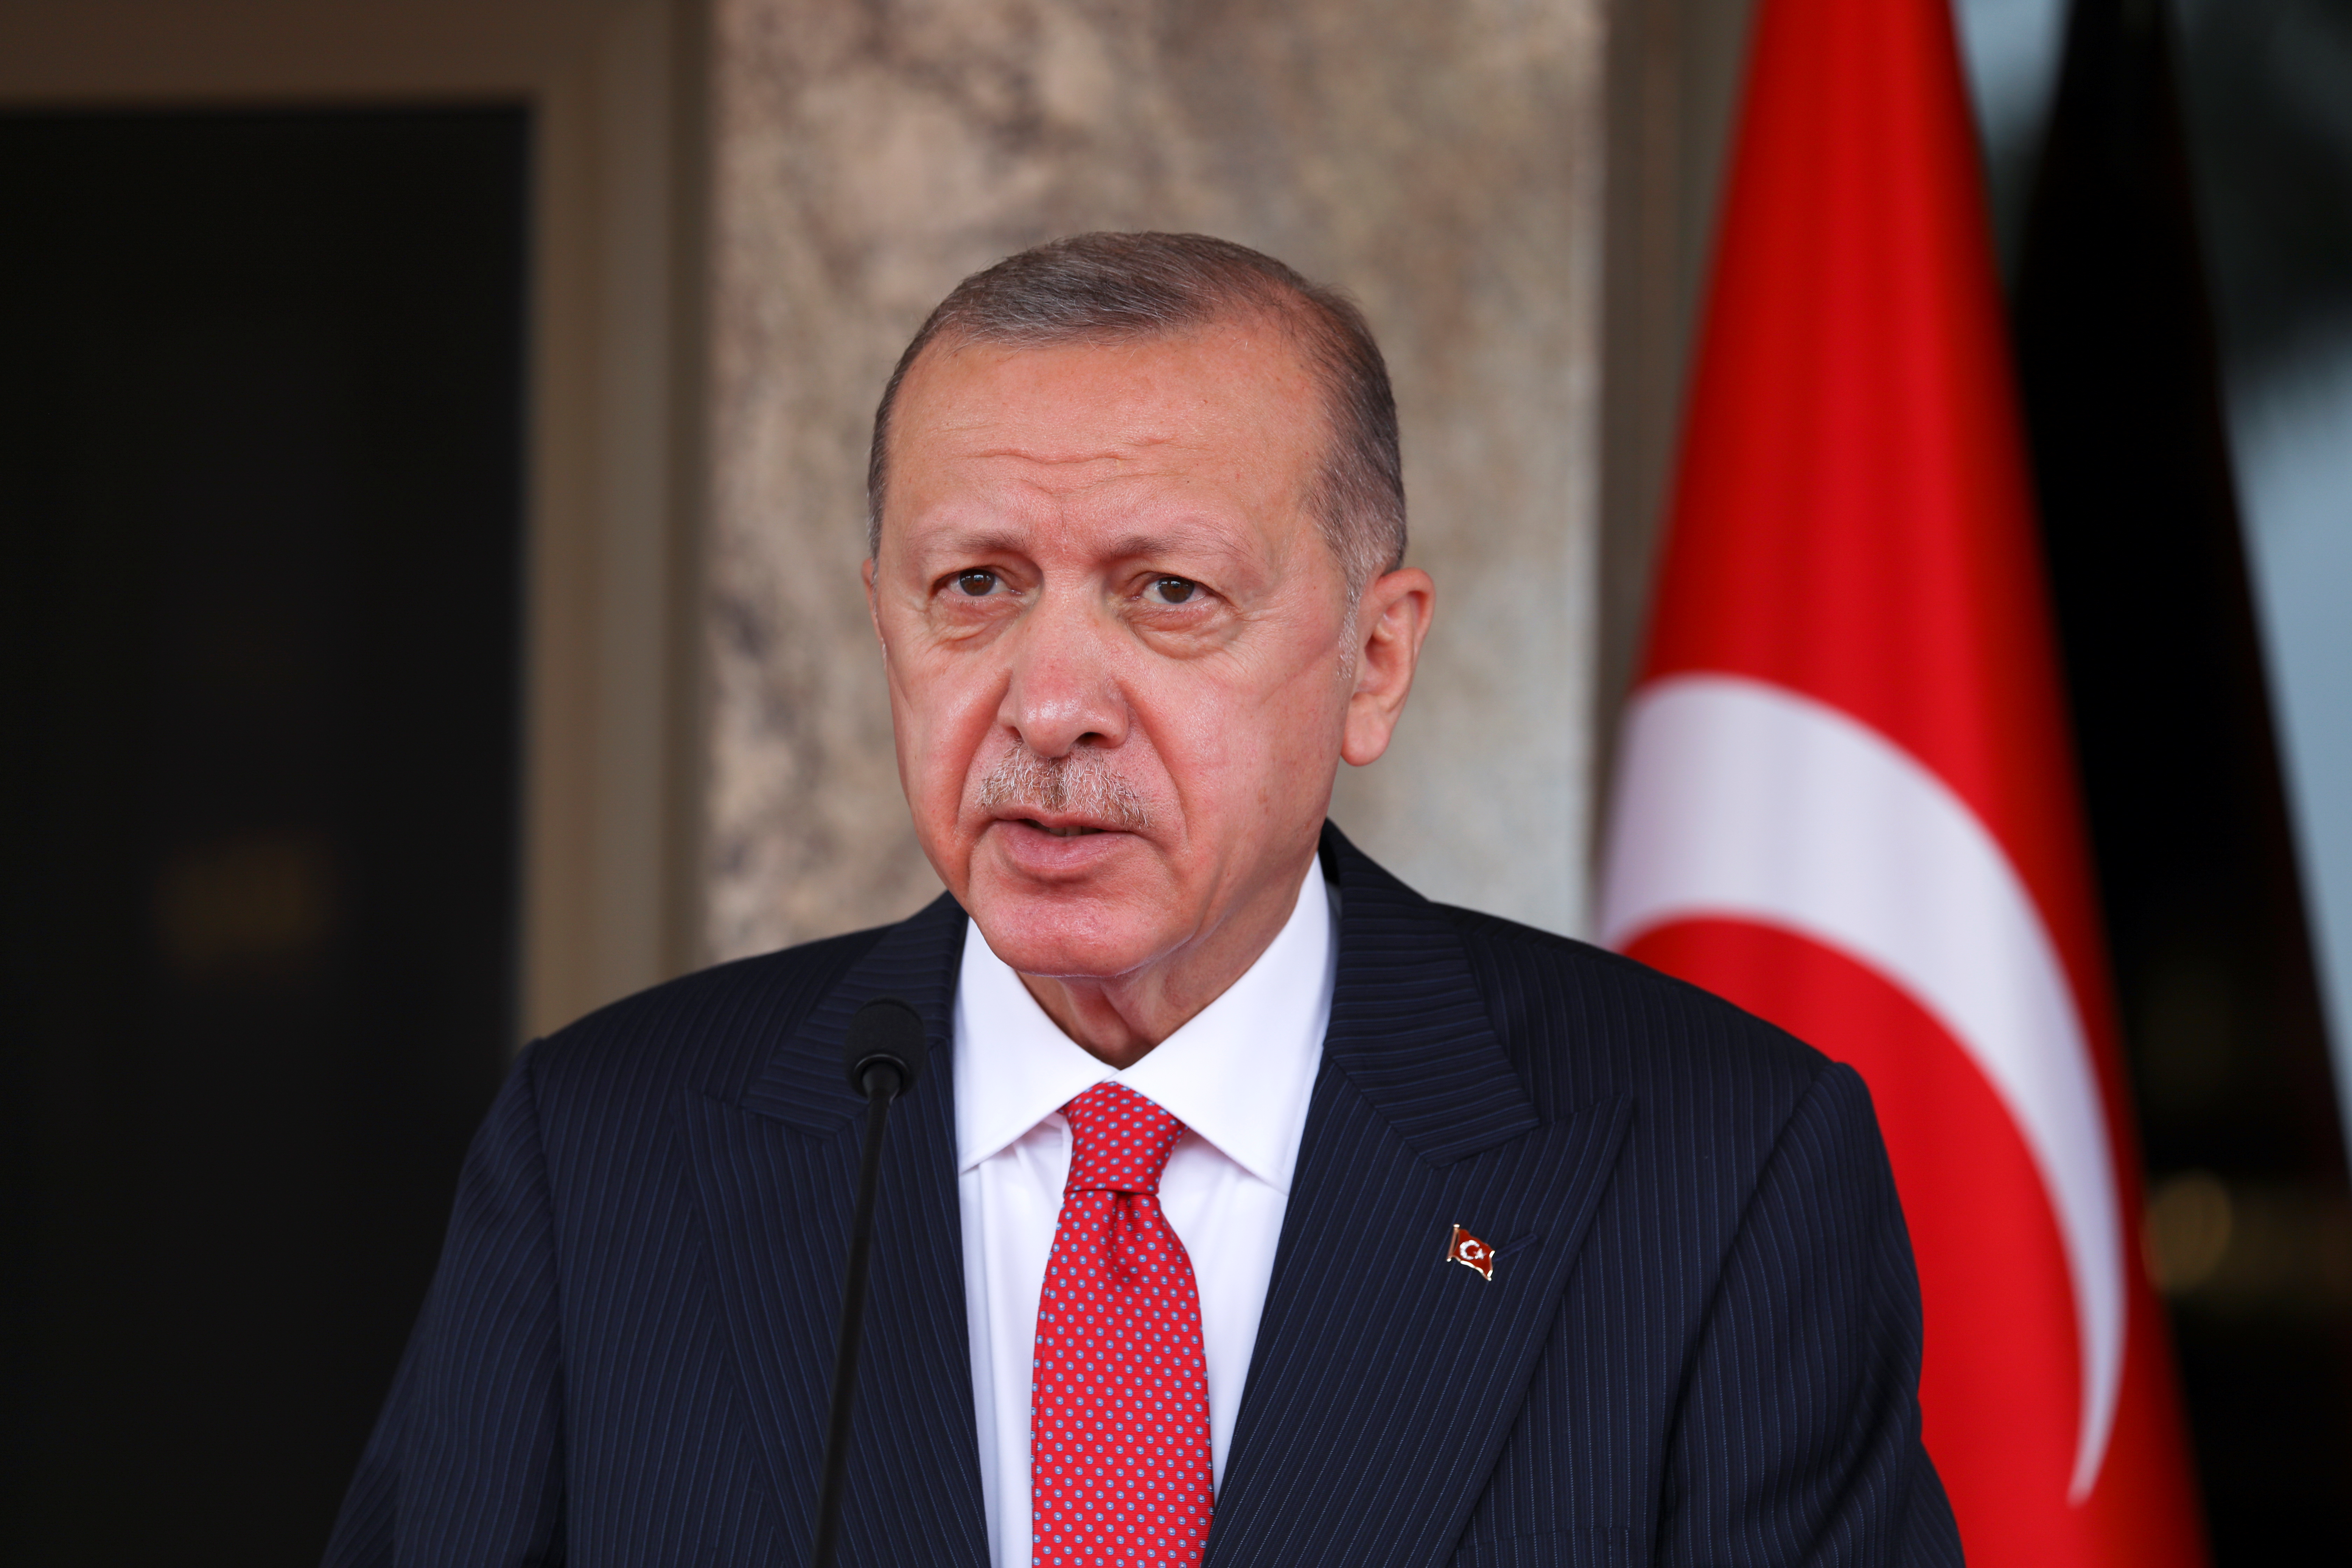 Nigerian President Buhari and Turkish President Erdogan hold a news conference in Abuja